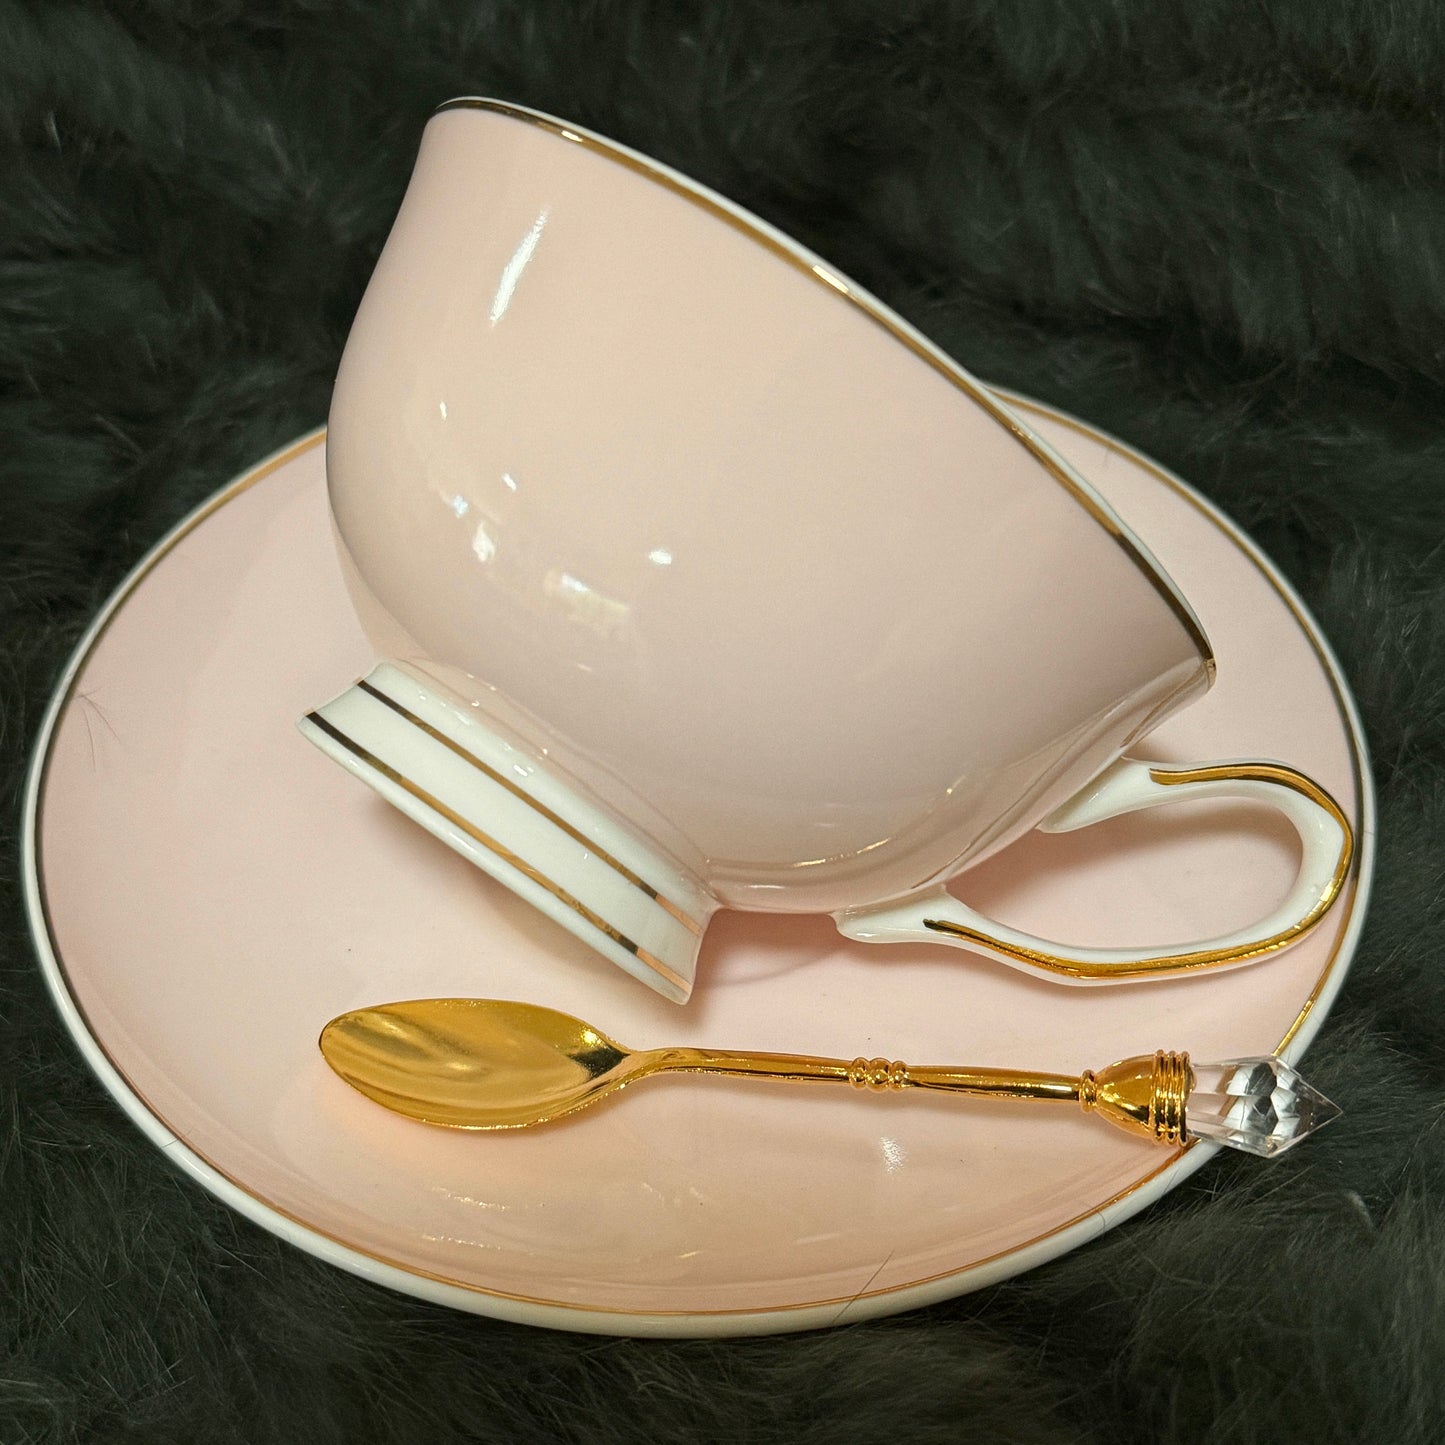 This is a pale pin k teacup and saucer set. It is a lovely pale pink colour and has 32 tea leaf reading images permanently fired inside the teacup. Remove the guess work out of tea leaf reading. Perfect gift for Mom, friend or loved one.